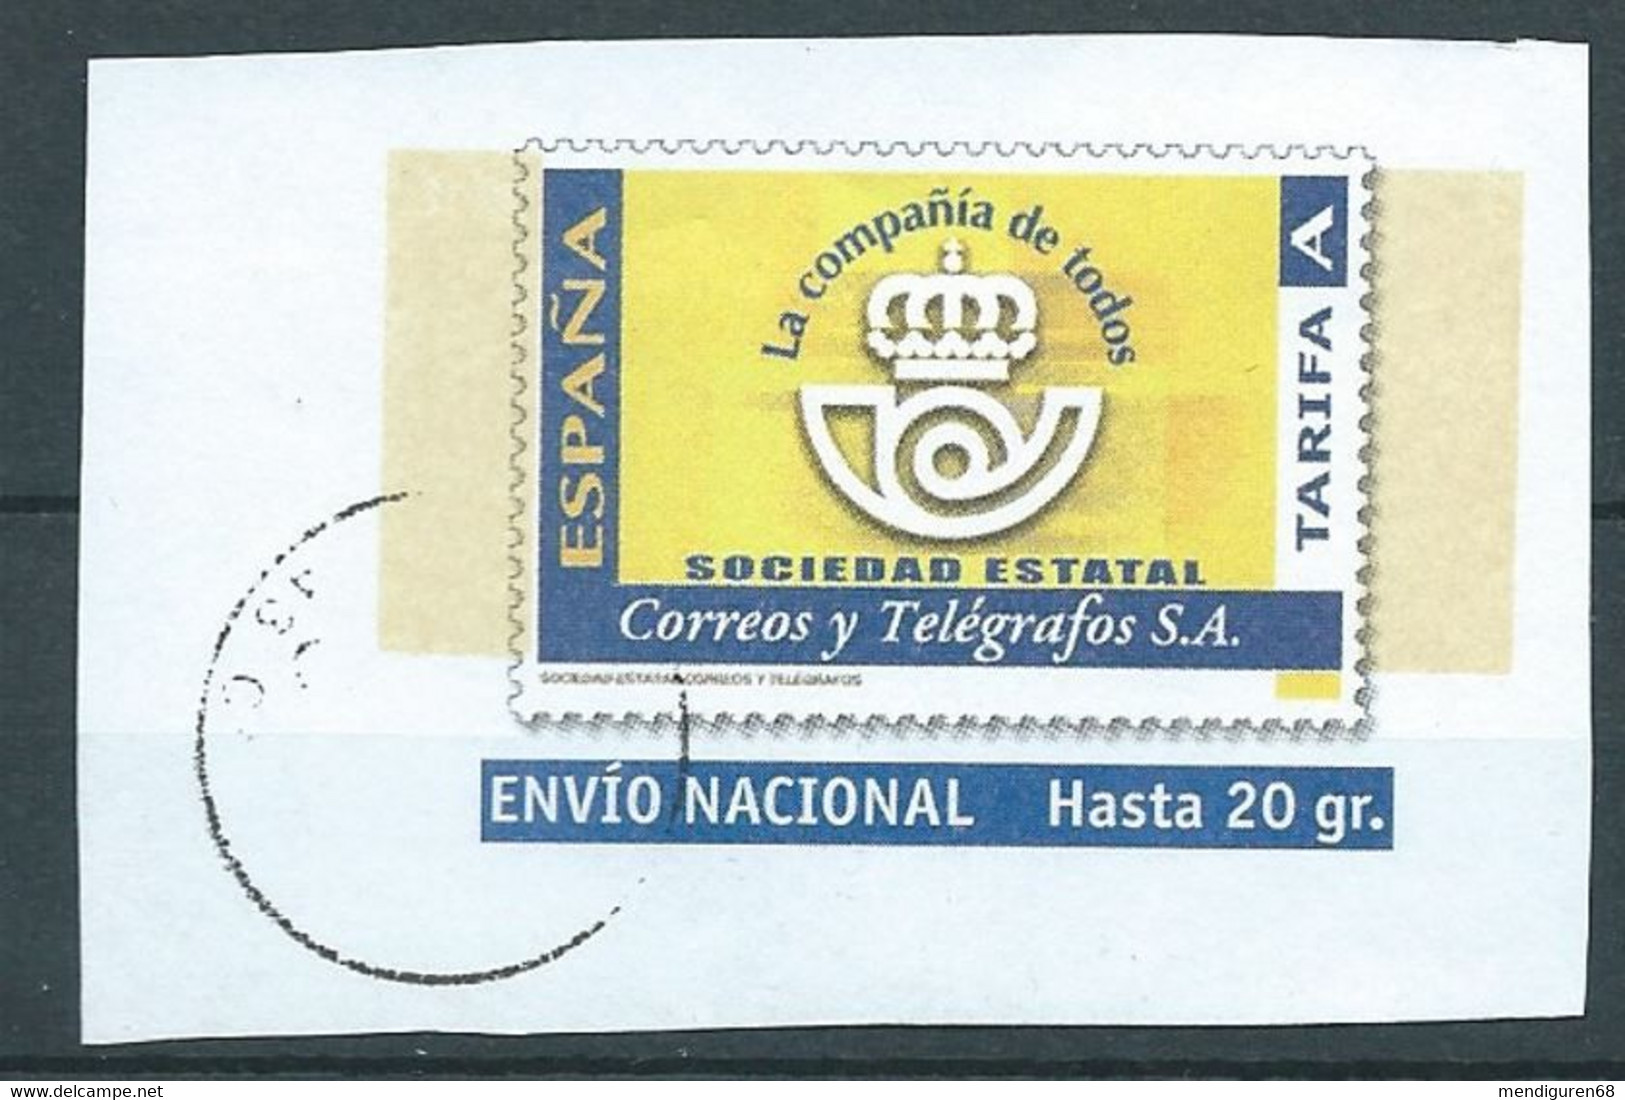 ESPAGNE SPANIEN SPAIN ESPAÑA 2022 LABEL PREFRANCHED ENVELOPE RATE A USED - Fiscali-postali